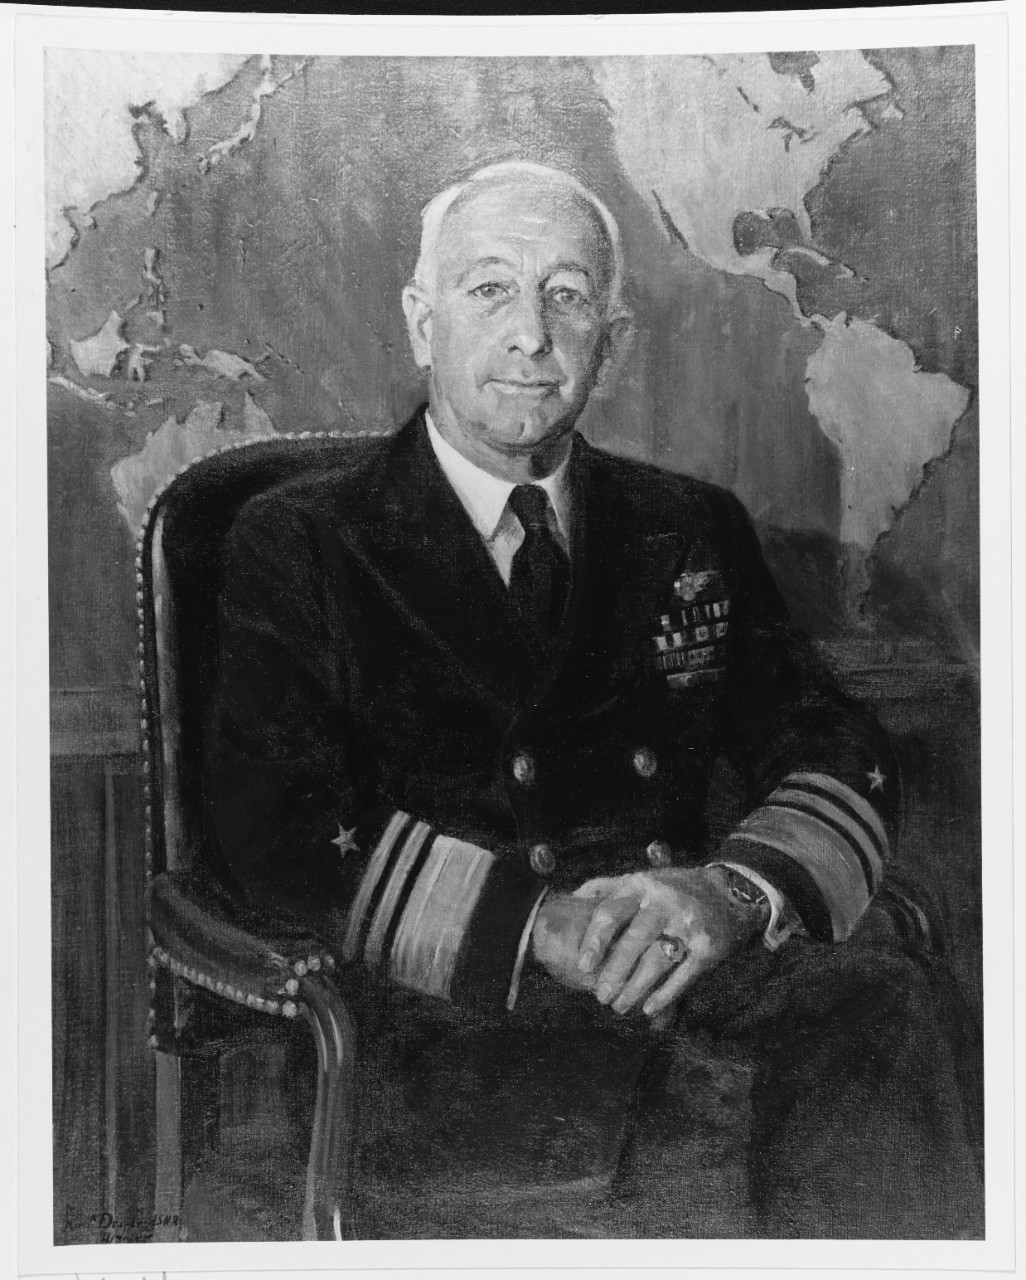 Photo #: KN-21651 Vice Admiral Aubrey Wray Fitch, USN